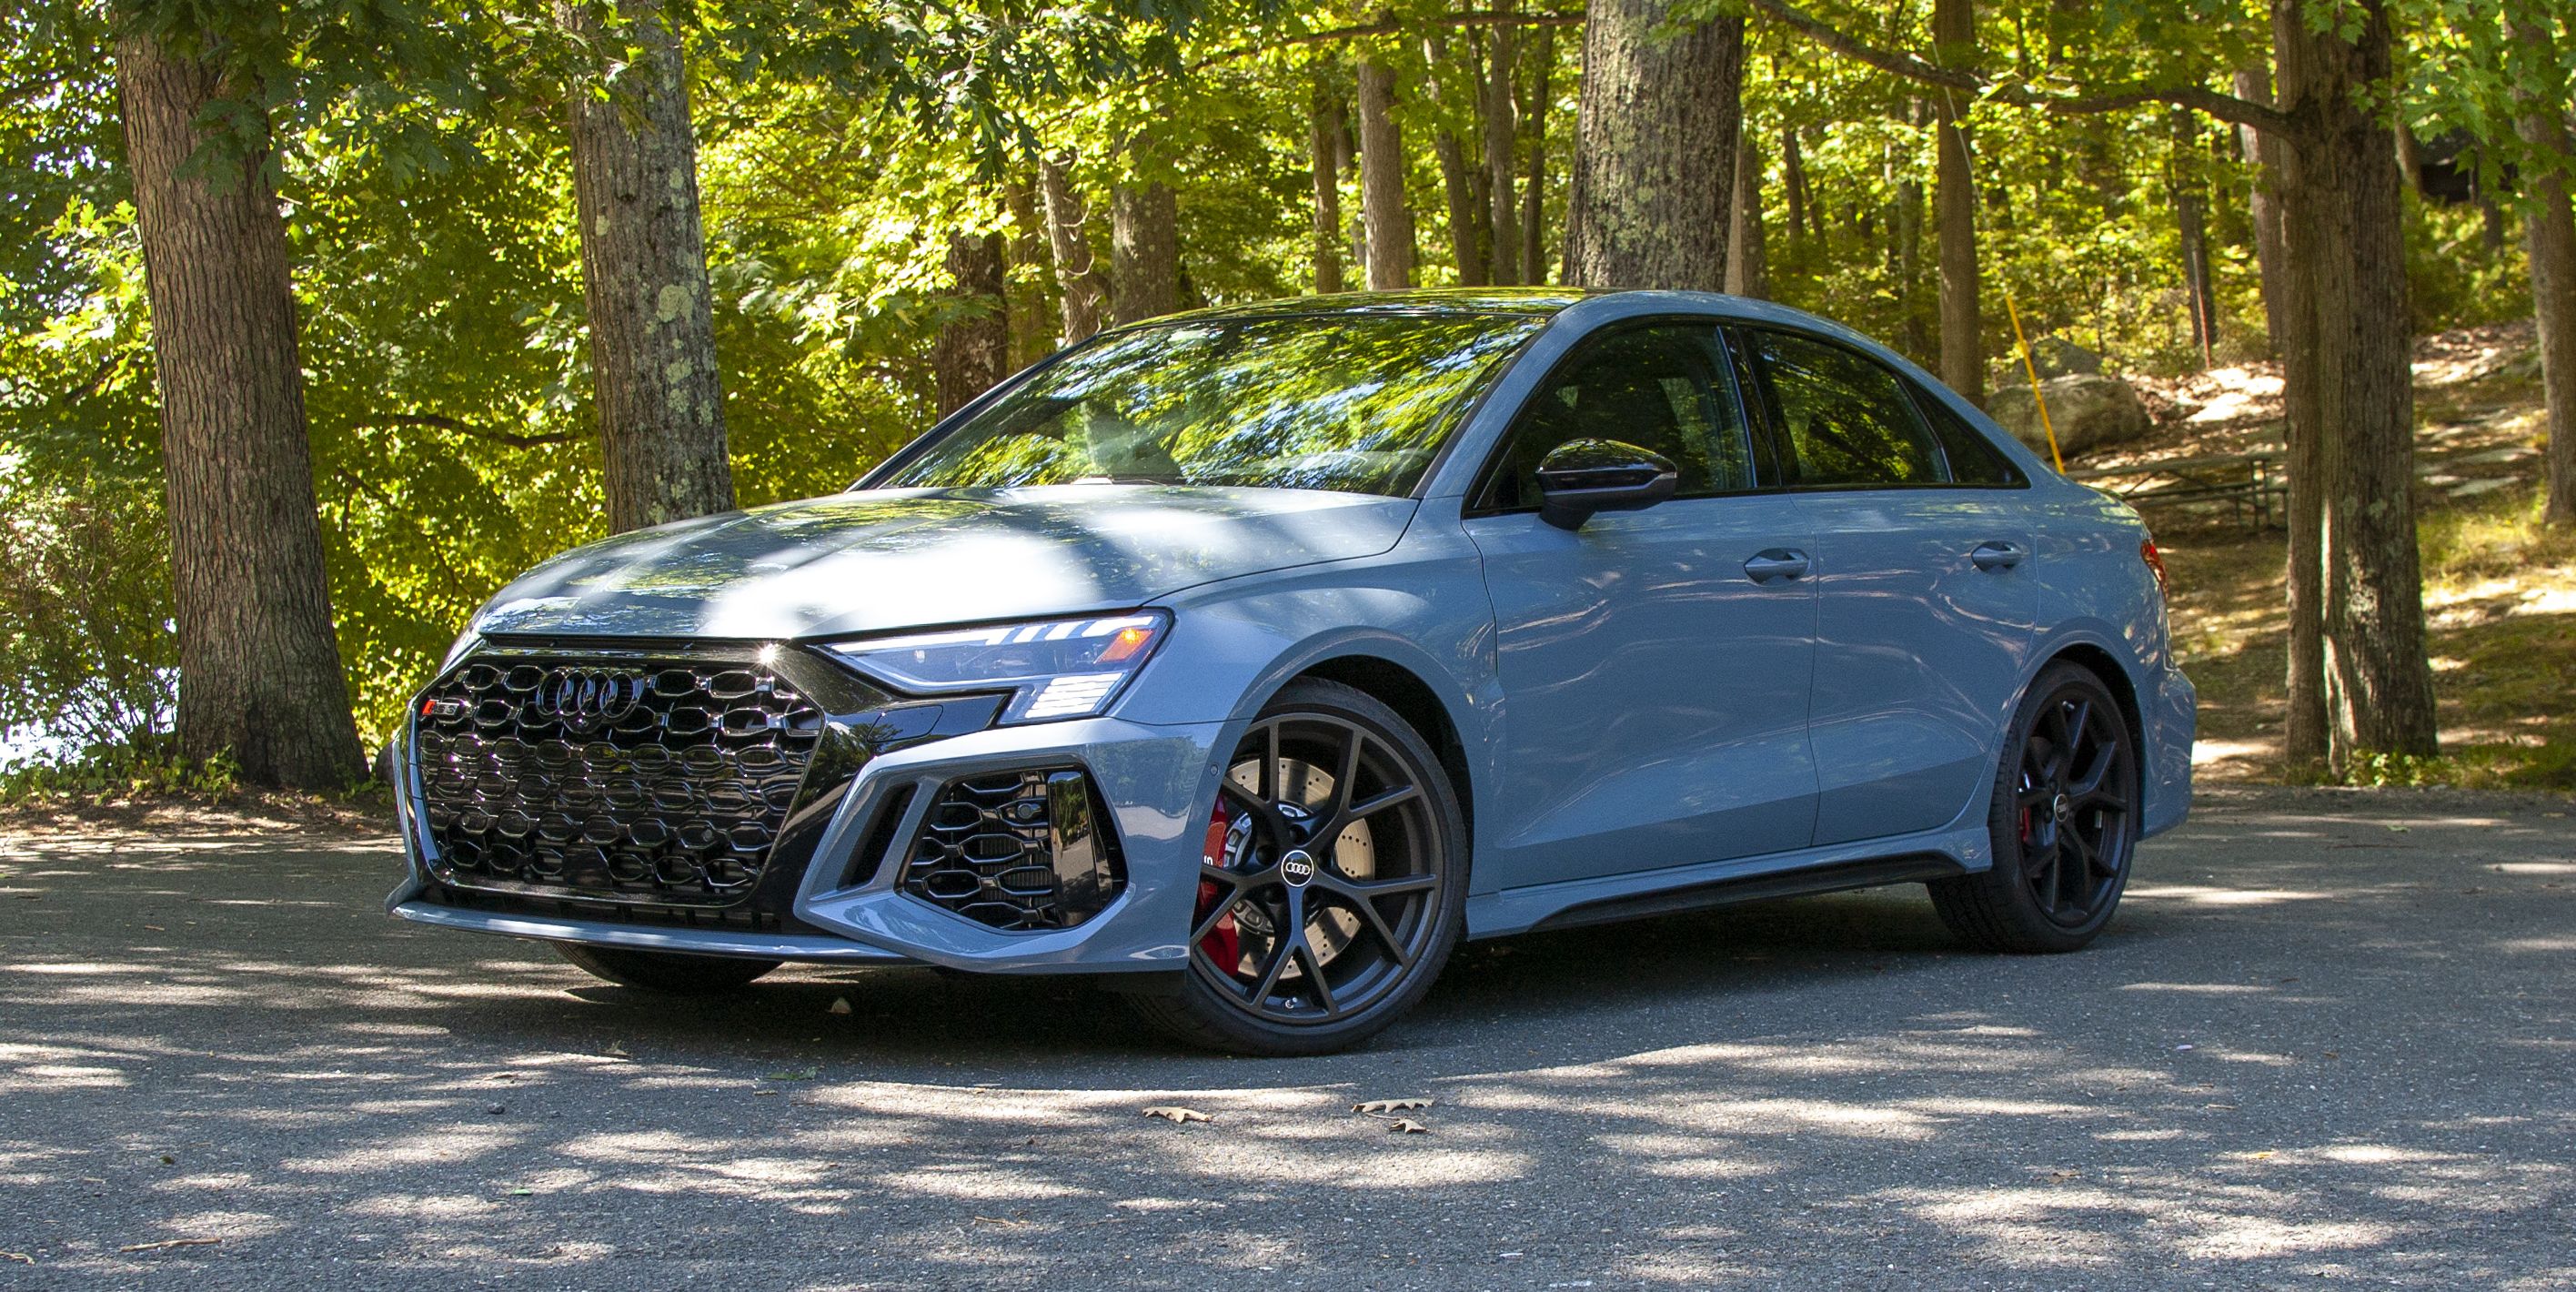 The Audi RS3 Is a No-Compromise Sport Sedan